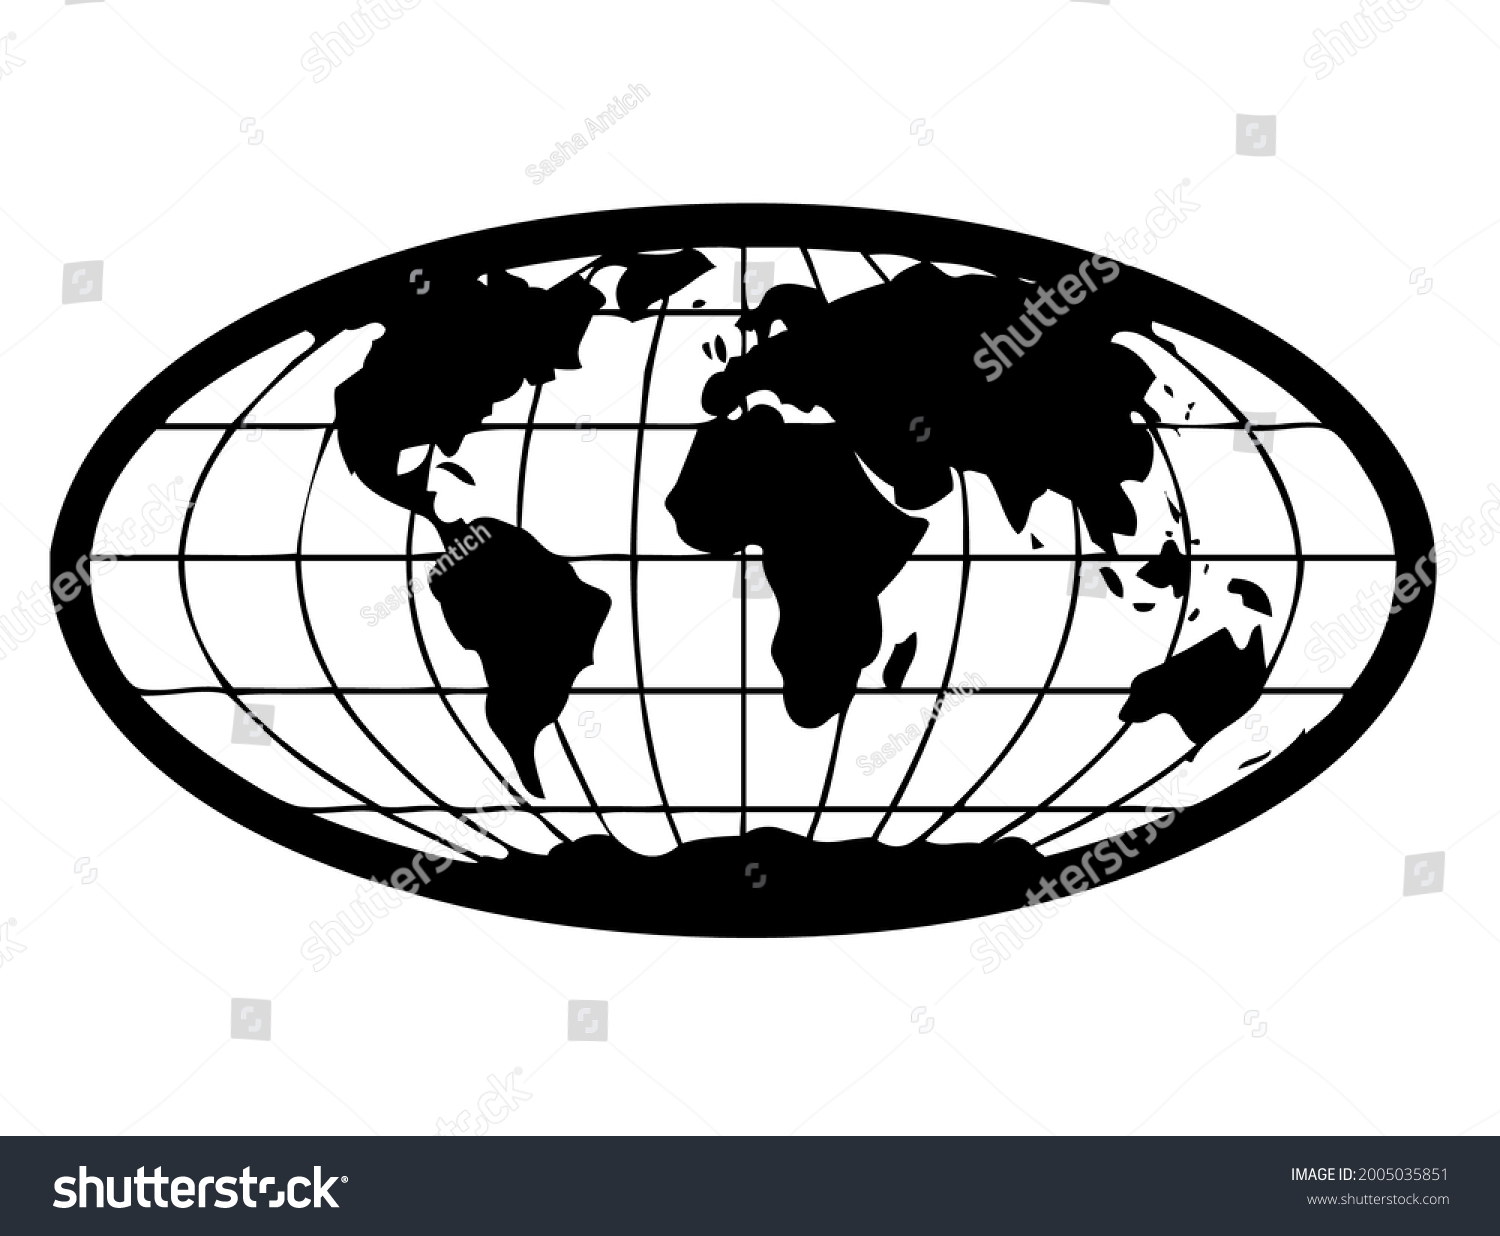 2,545 World map with longitude and latitude lines Images, Stock Photos ...